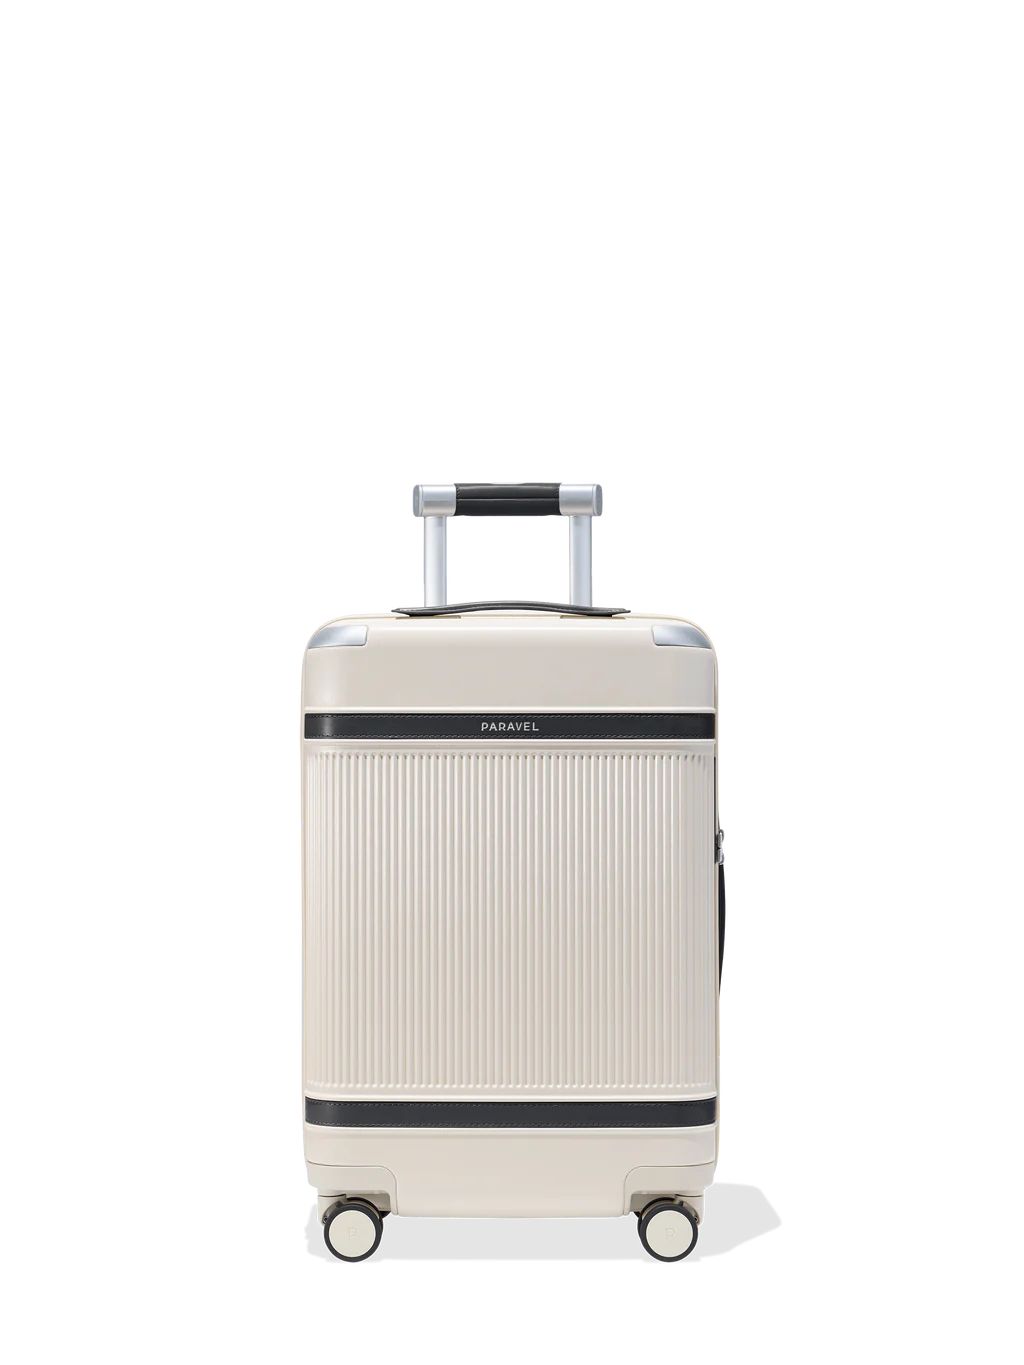 Aviator | Carry-On | Paravel